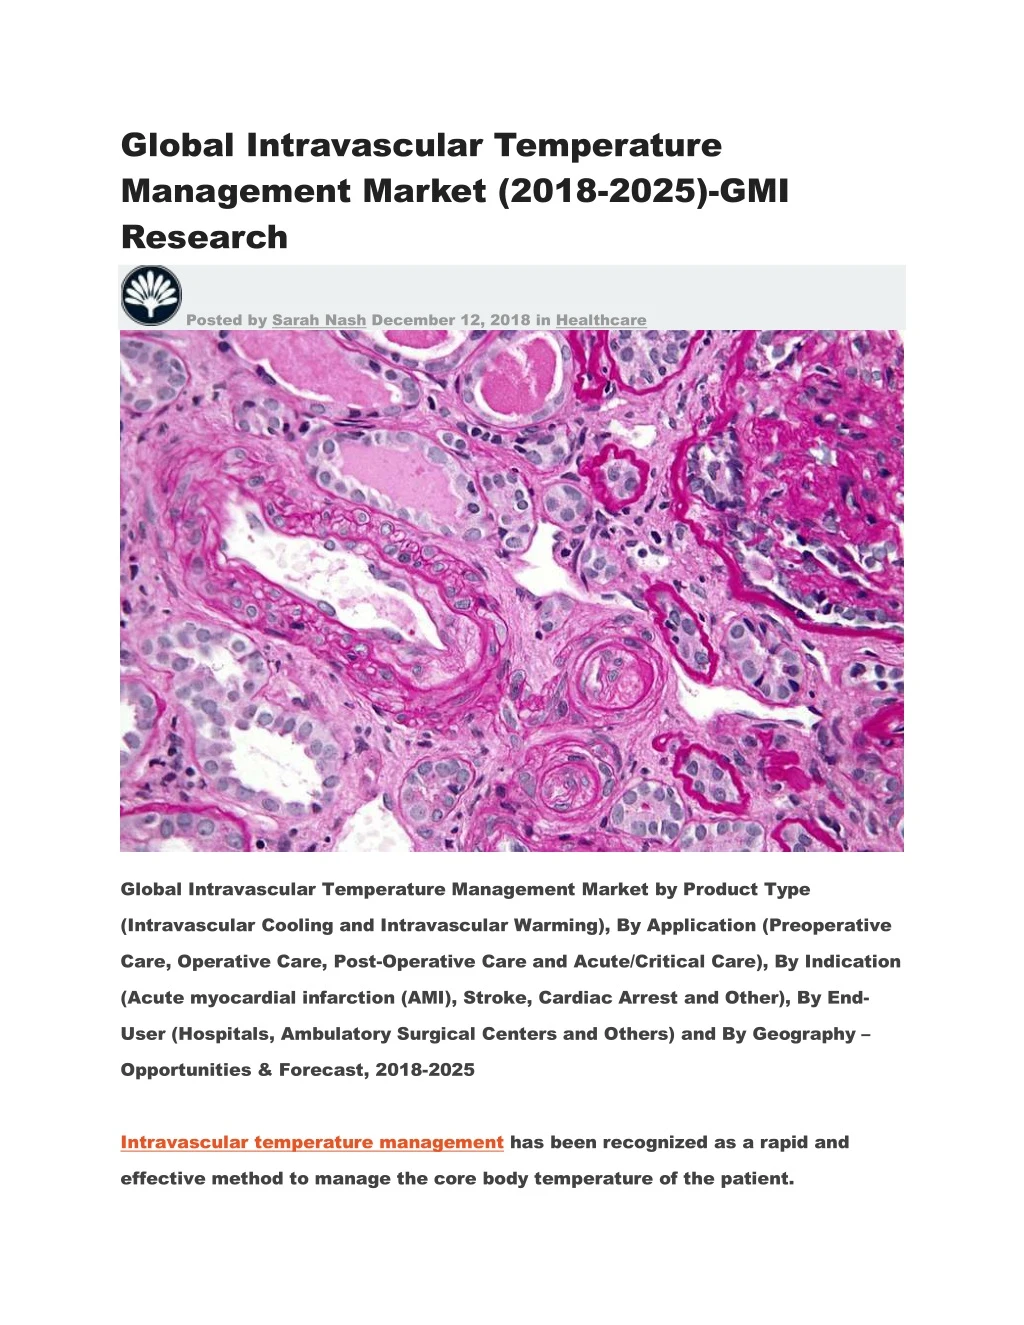 Ppt Global Intravascular Temperature Management Market 2018 2025 Gmi Research Powerpoint